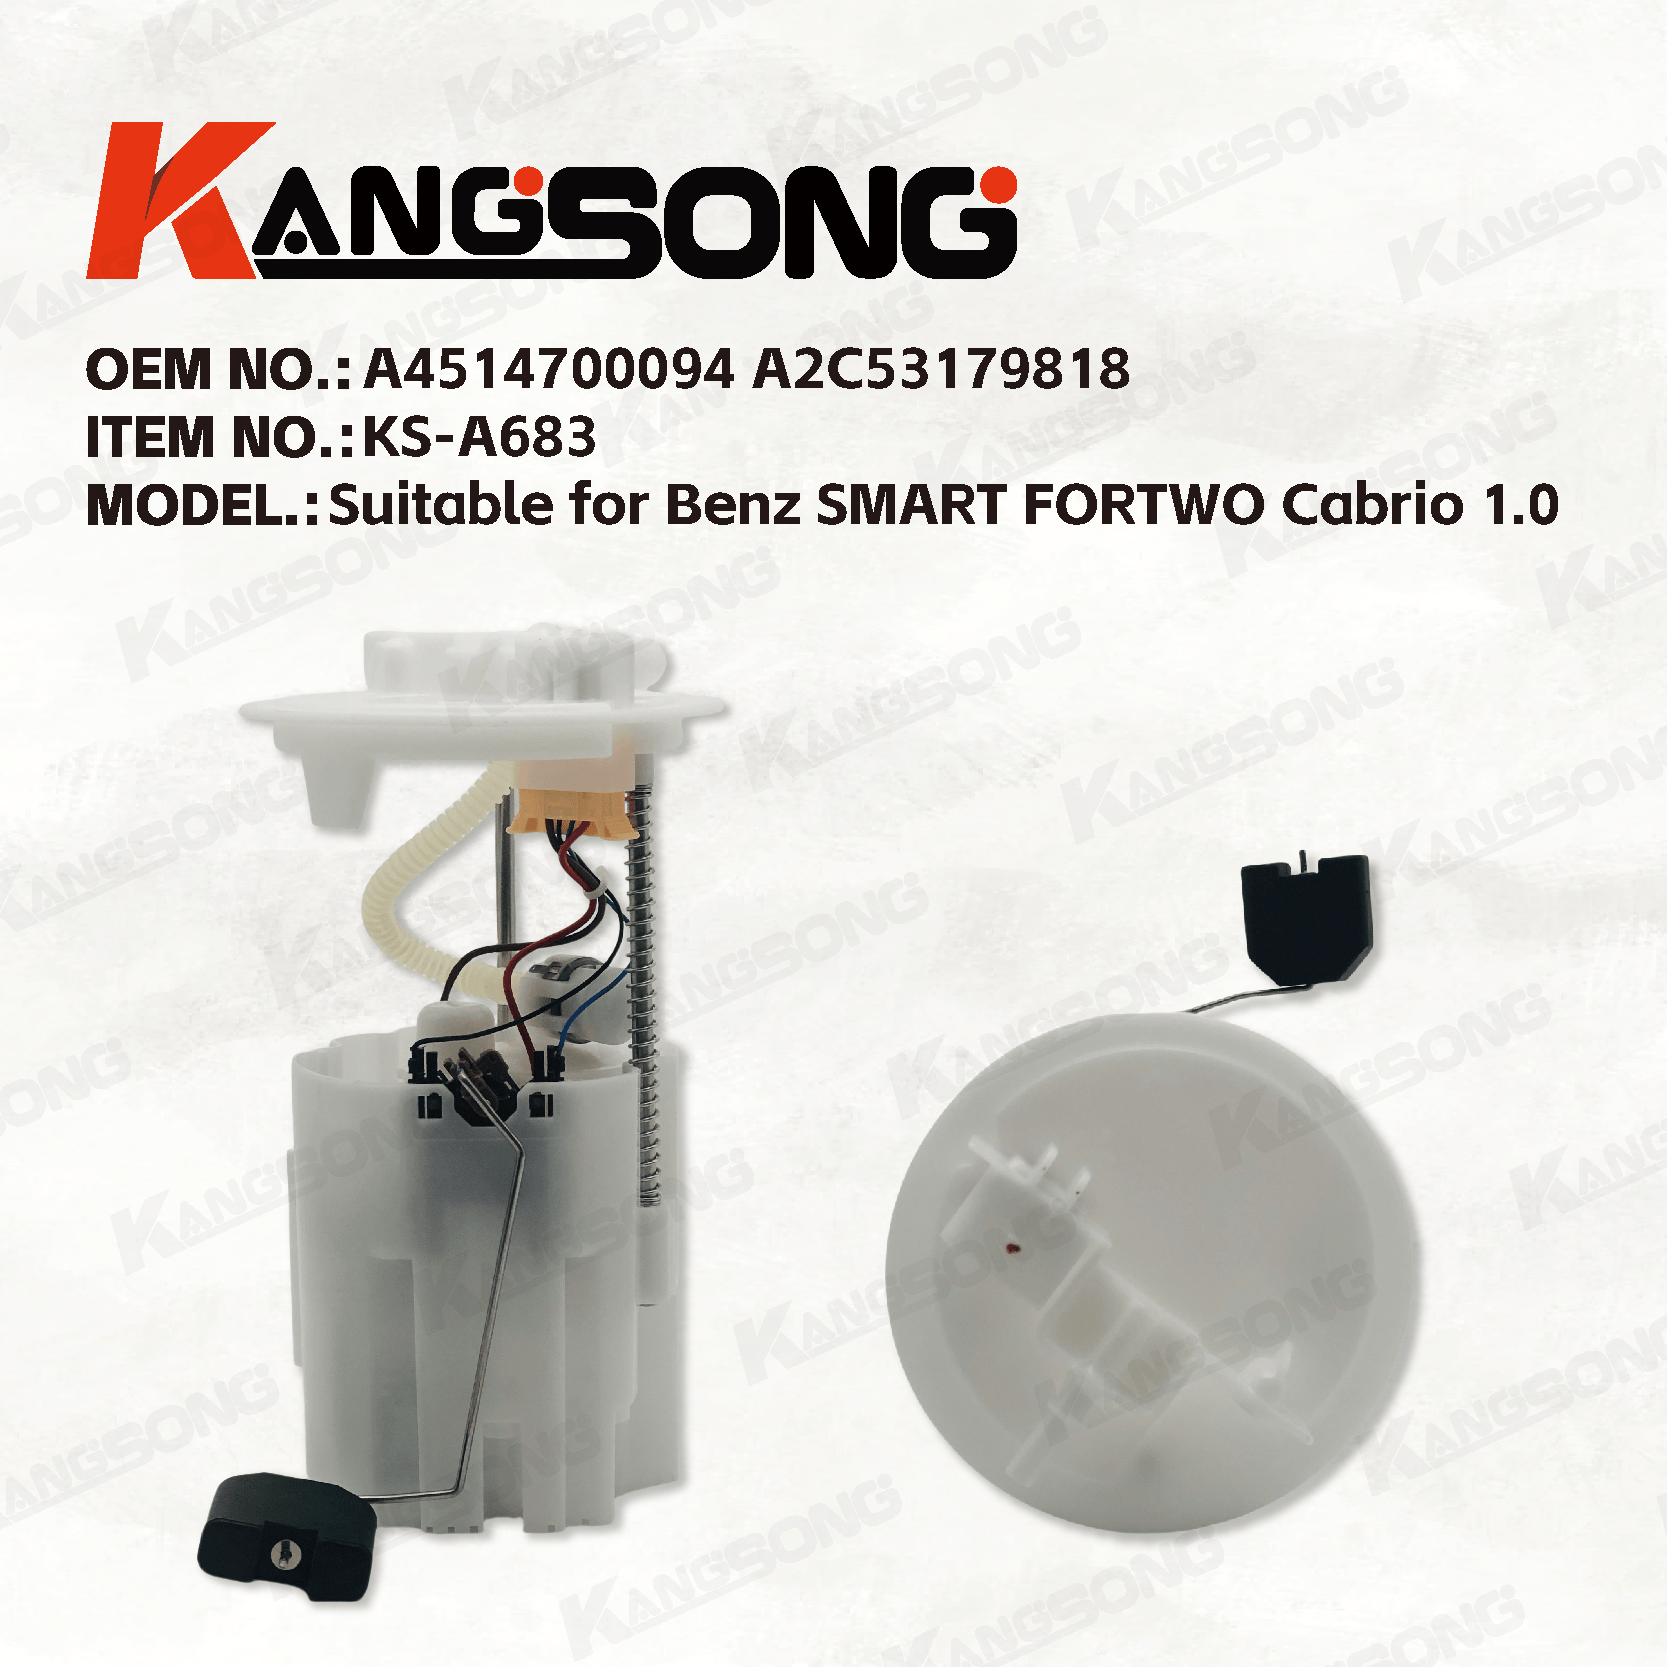 Applicable to Mercedes-Benz SMART FORTWO Cabrio 1.0 /A4514700094 A2C53179818 / Fuel Pump Assembly/KS-A683